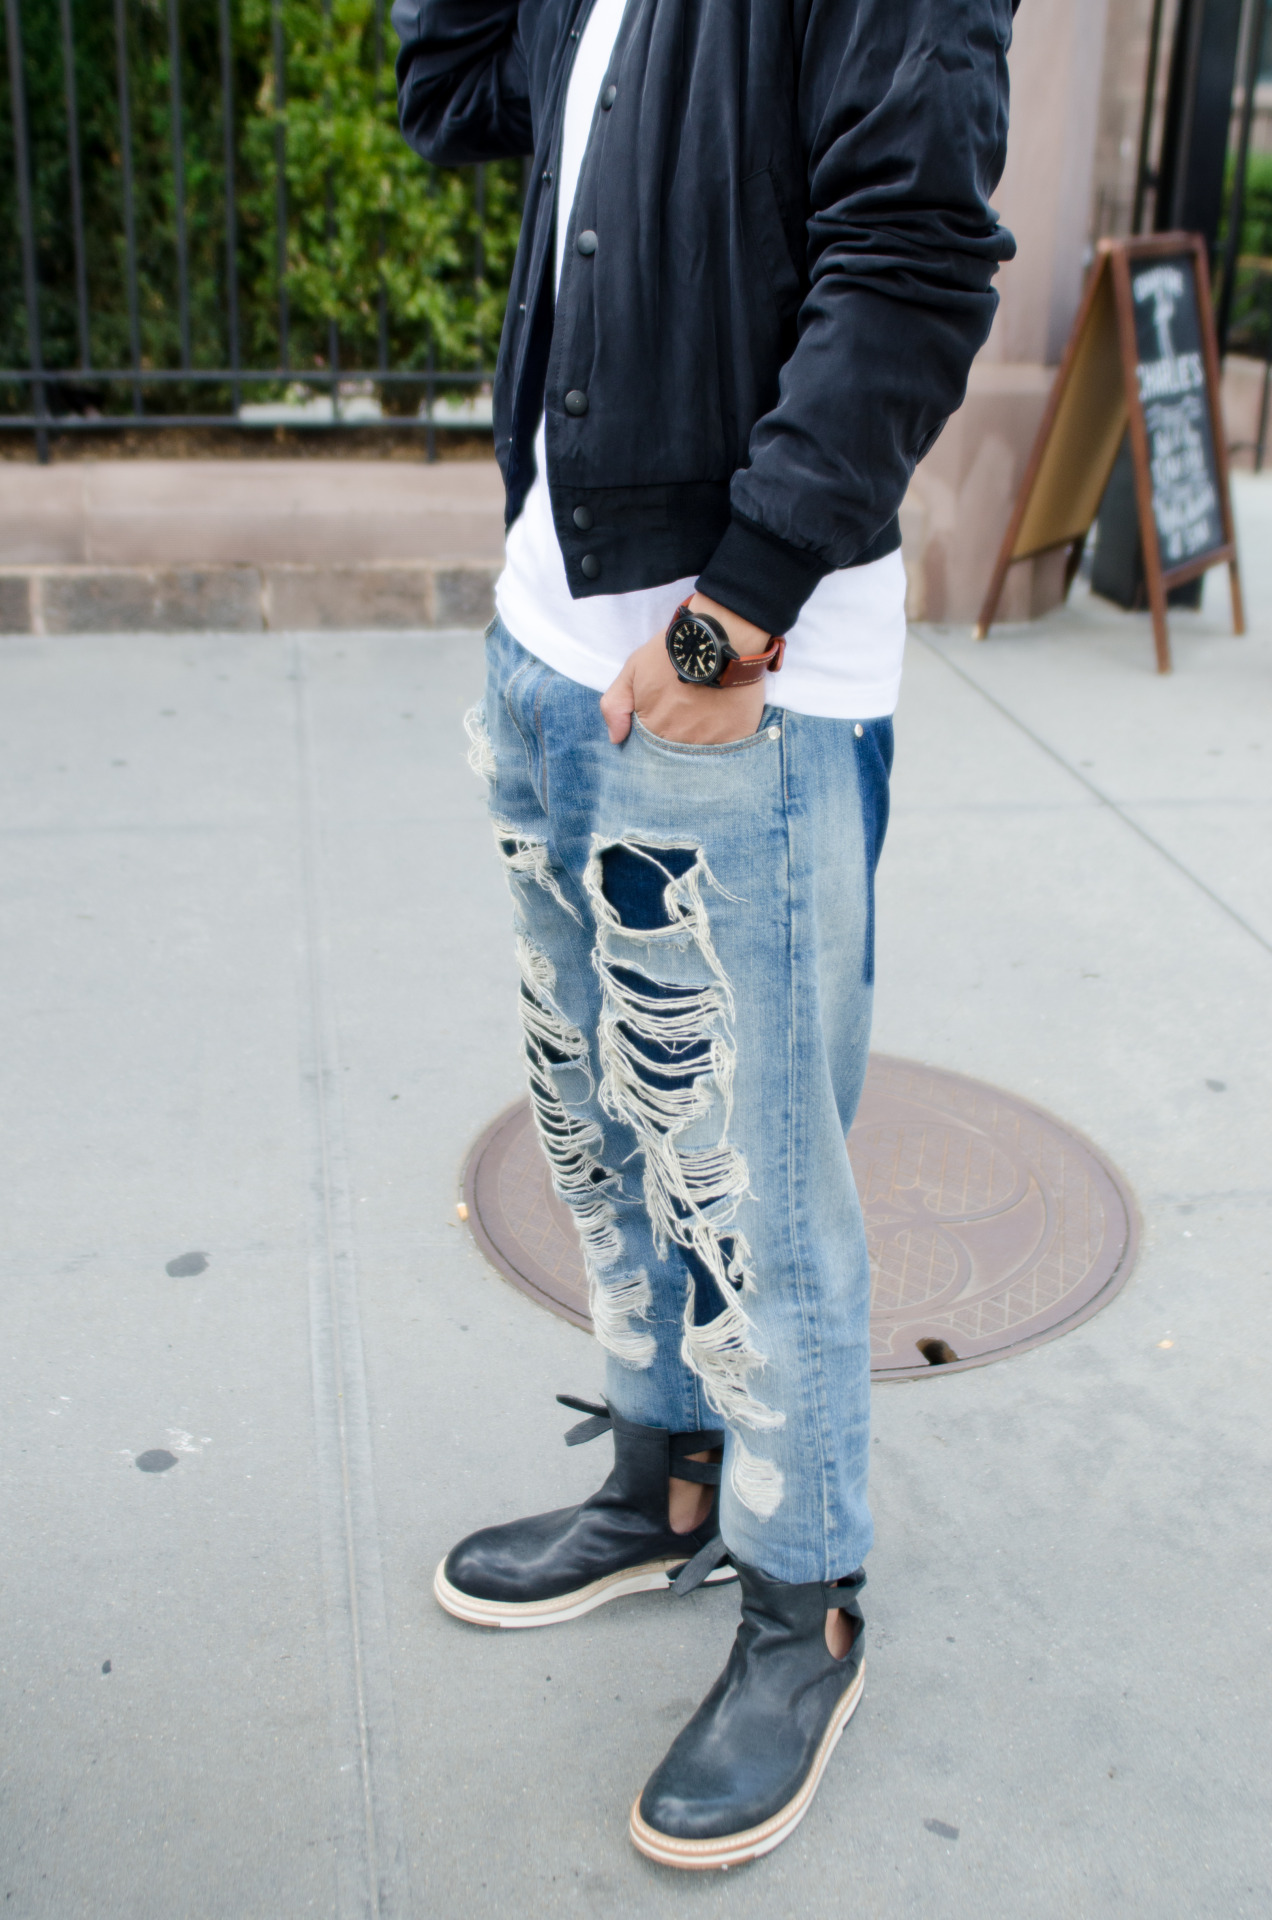 Shredded Jeans on the Streets of NYC
Streetstyle at Mercedes-Benz Fashion Week
Photo by Lordale Benosa